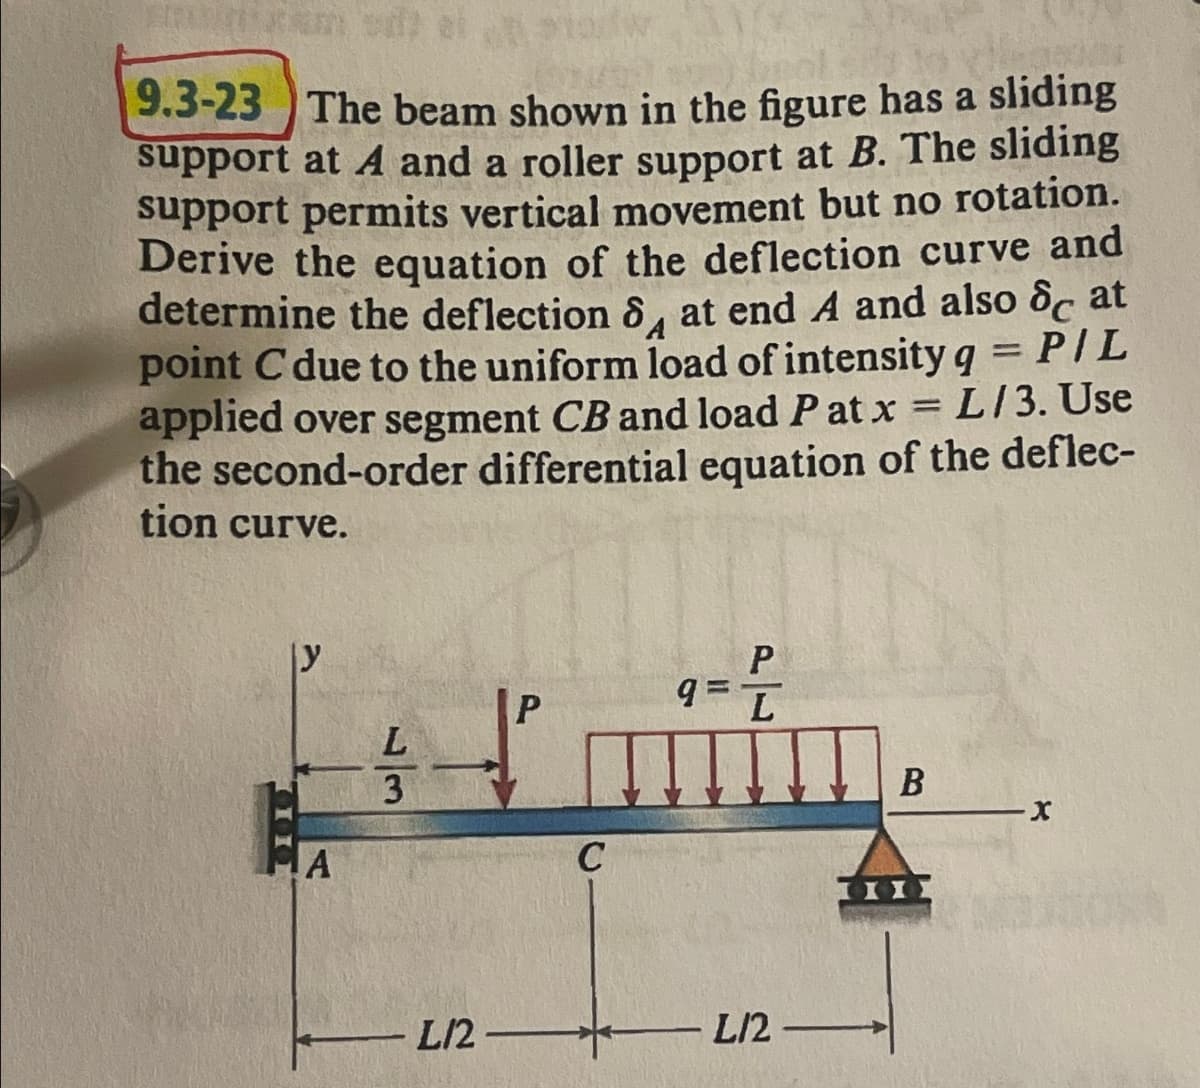 9.3-23 The beam shown in the figure has a sliding
support at A and a roller support at B. The sliding
support permits vertical movement but no rotation.
Derive the equation of the deflection curve and
determine the deflection 8 at end A and also c at
point C due to the uniform load of intensity q = P/L
L/3. Use
applied over segment CB and load Patx
the second-order differential equation of the deflec-
tion curve.
y
A
L
3
L12
P
C
P
9= L
L12
1
B
X